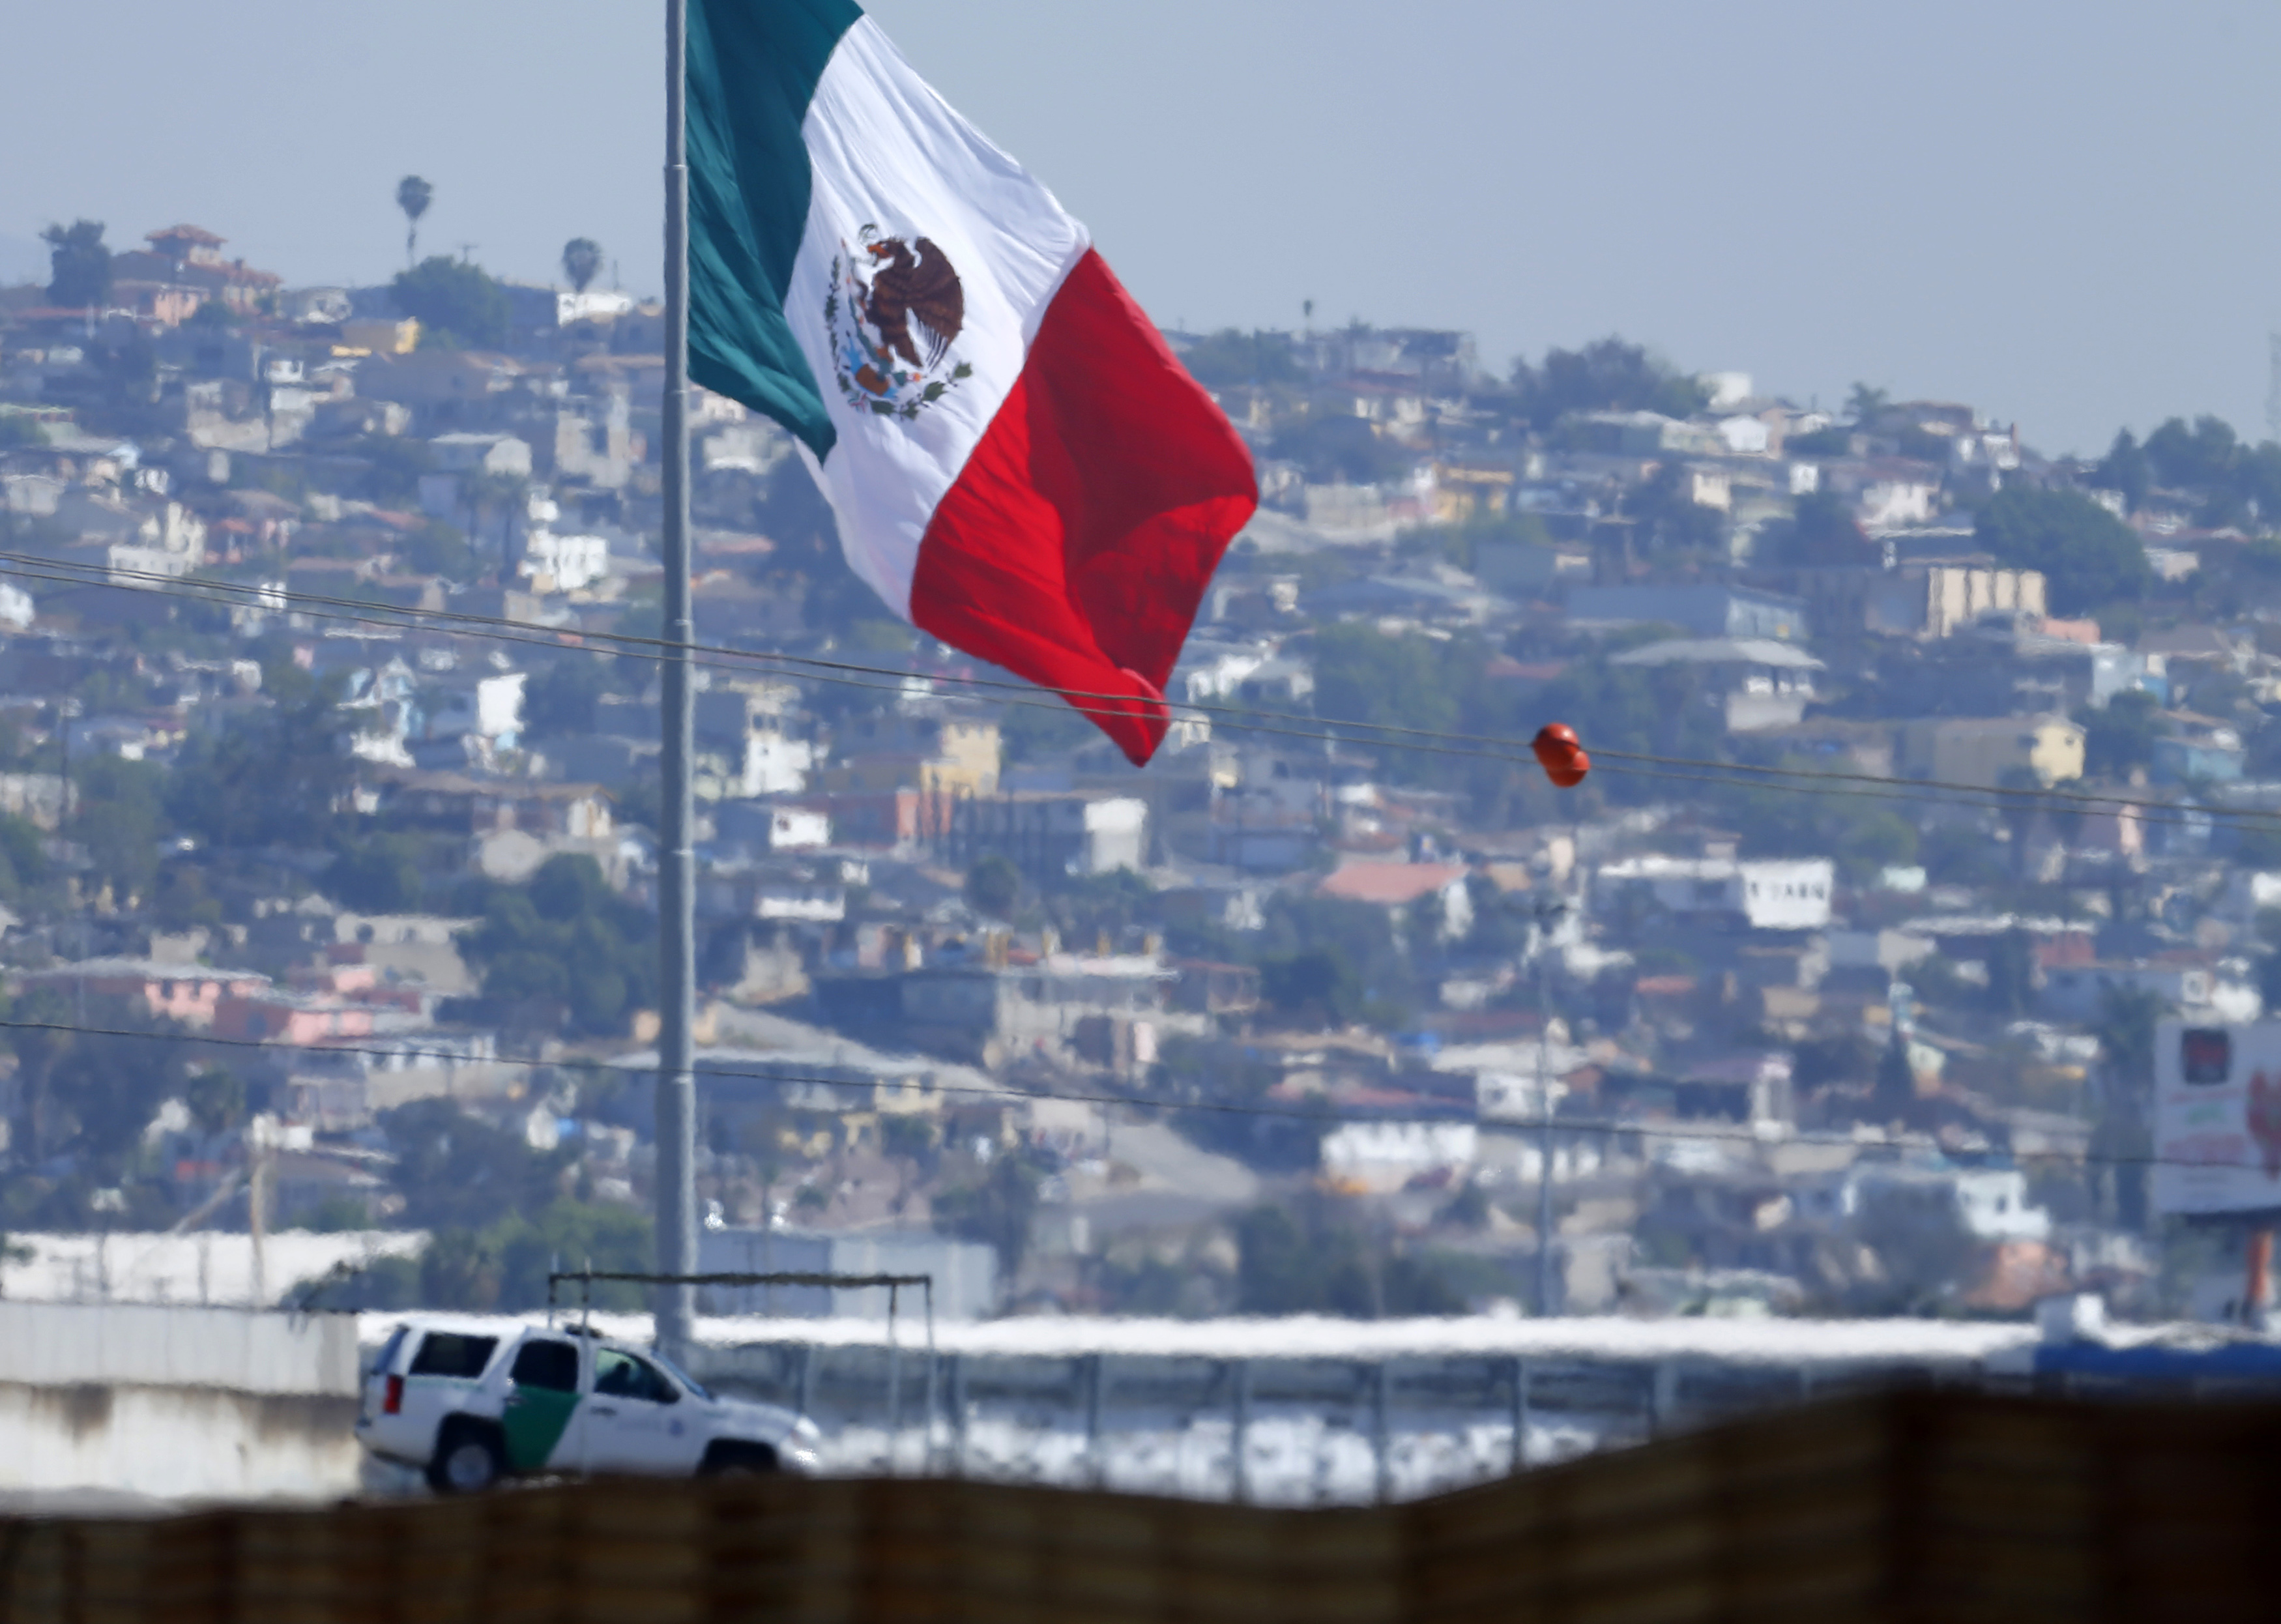 A U.S. border patrol officer sits in his vehicle looking out over Tijuana, Mexico from San Ysidro, California February 25, 2015. REUTERS/Mike Blake